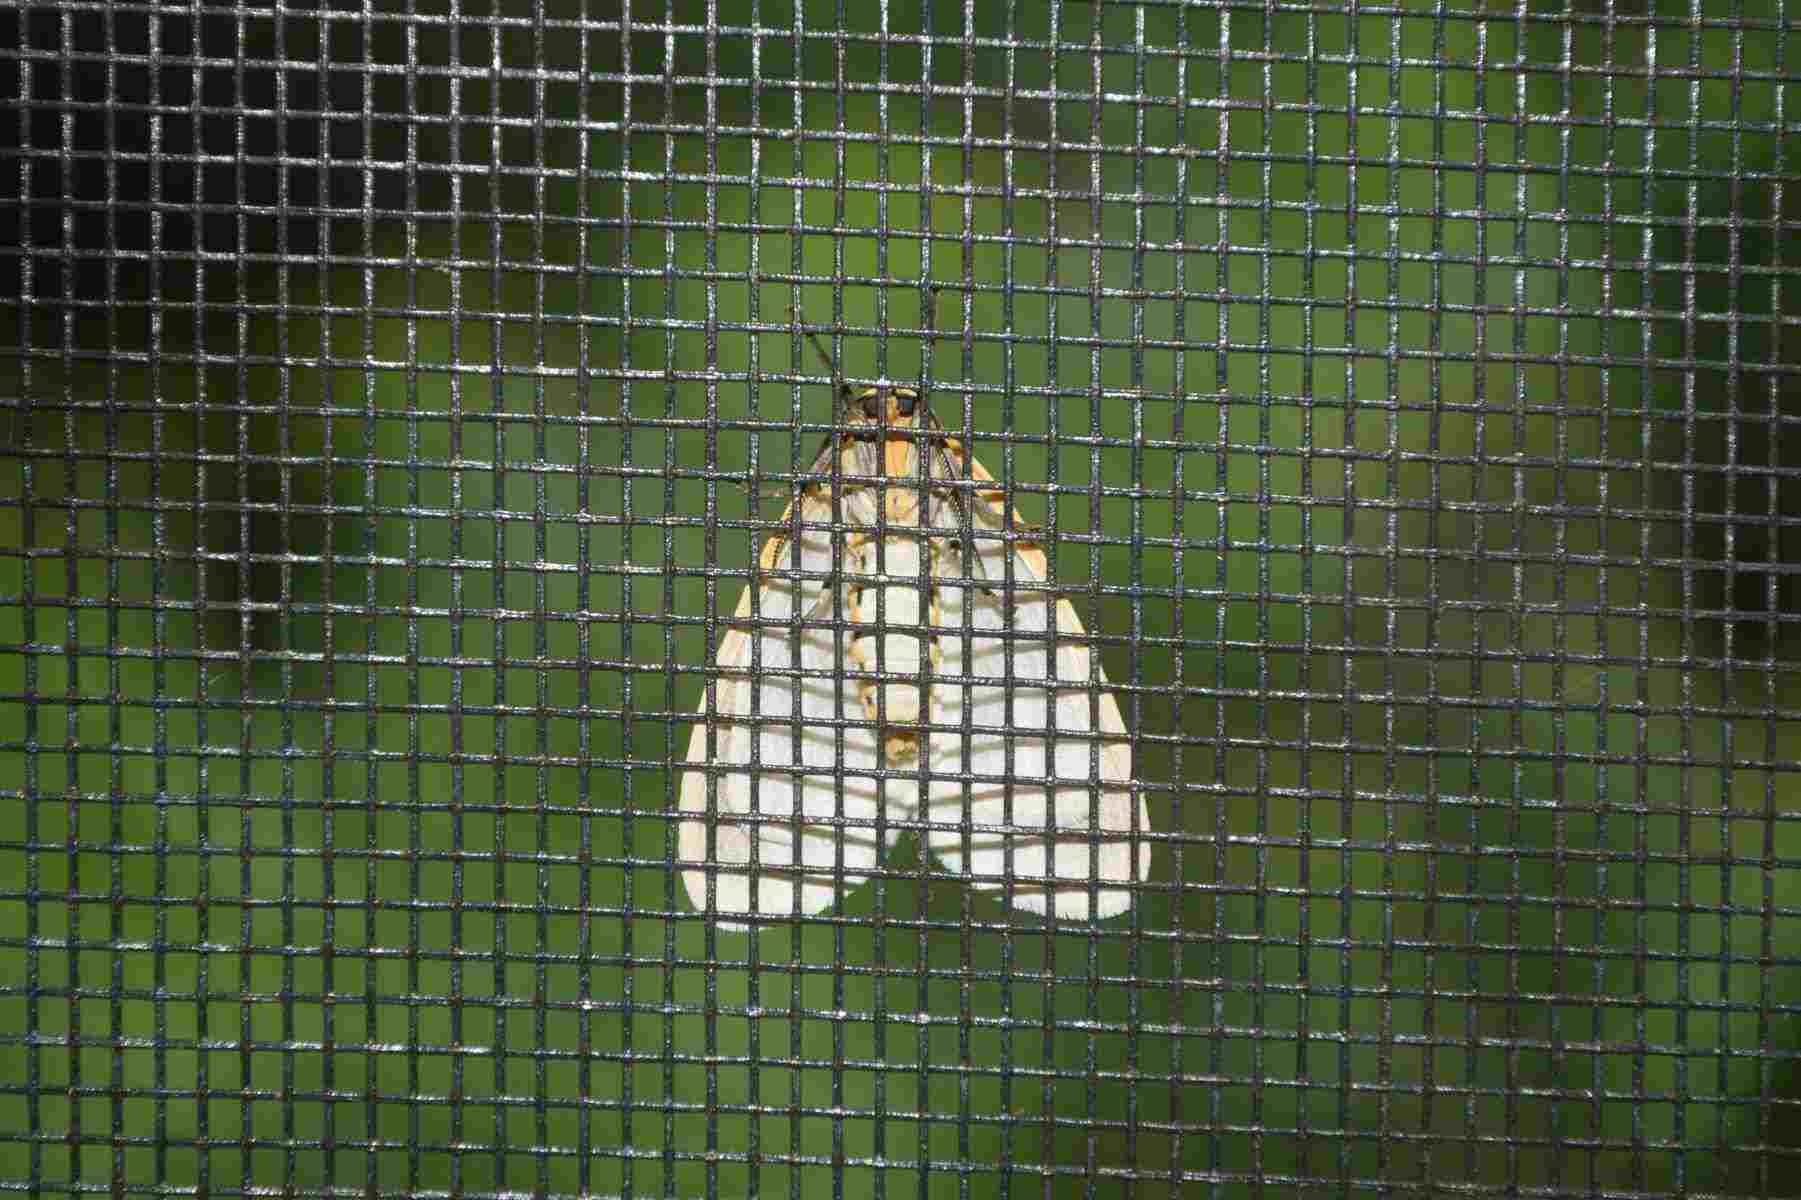 Moth sitting on the outside of a window screen